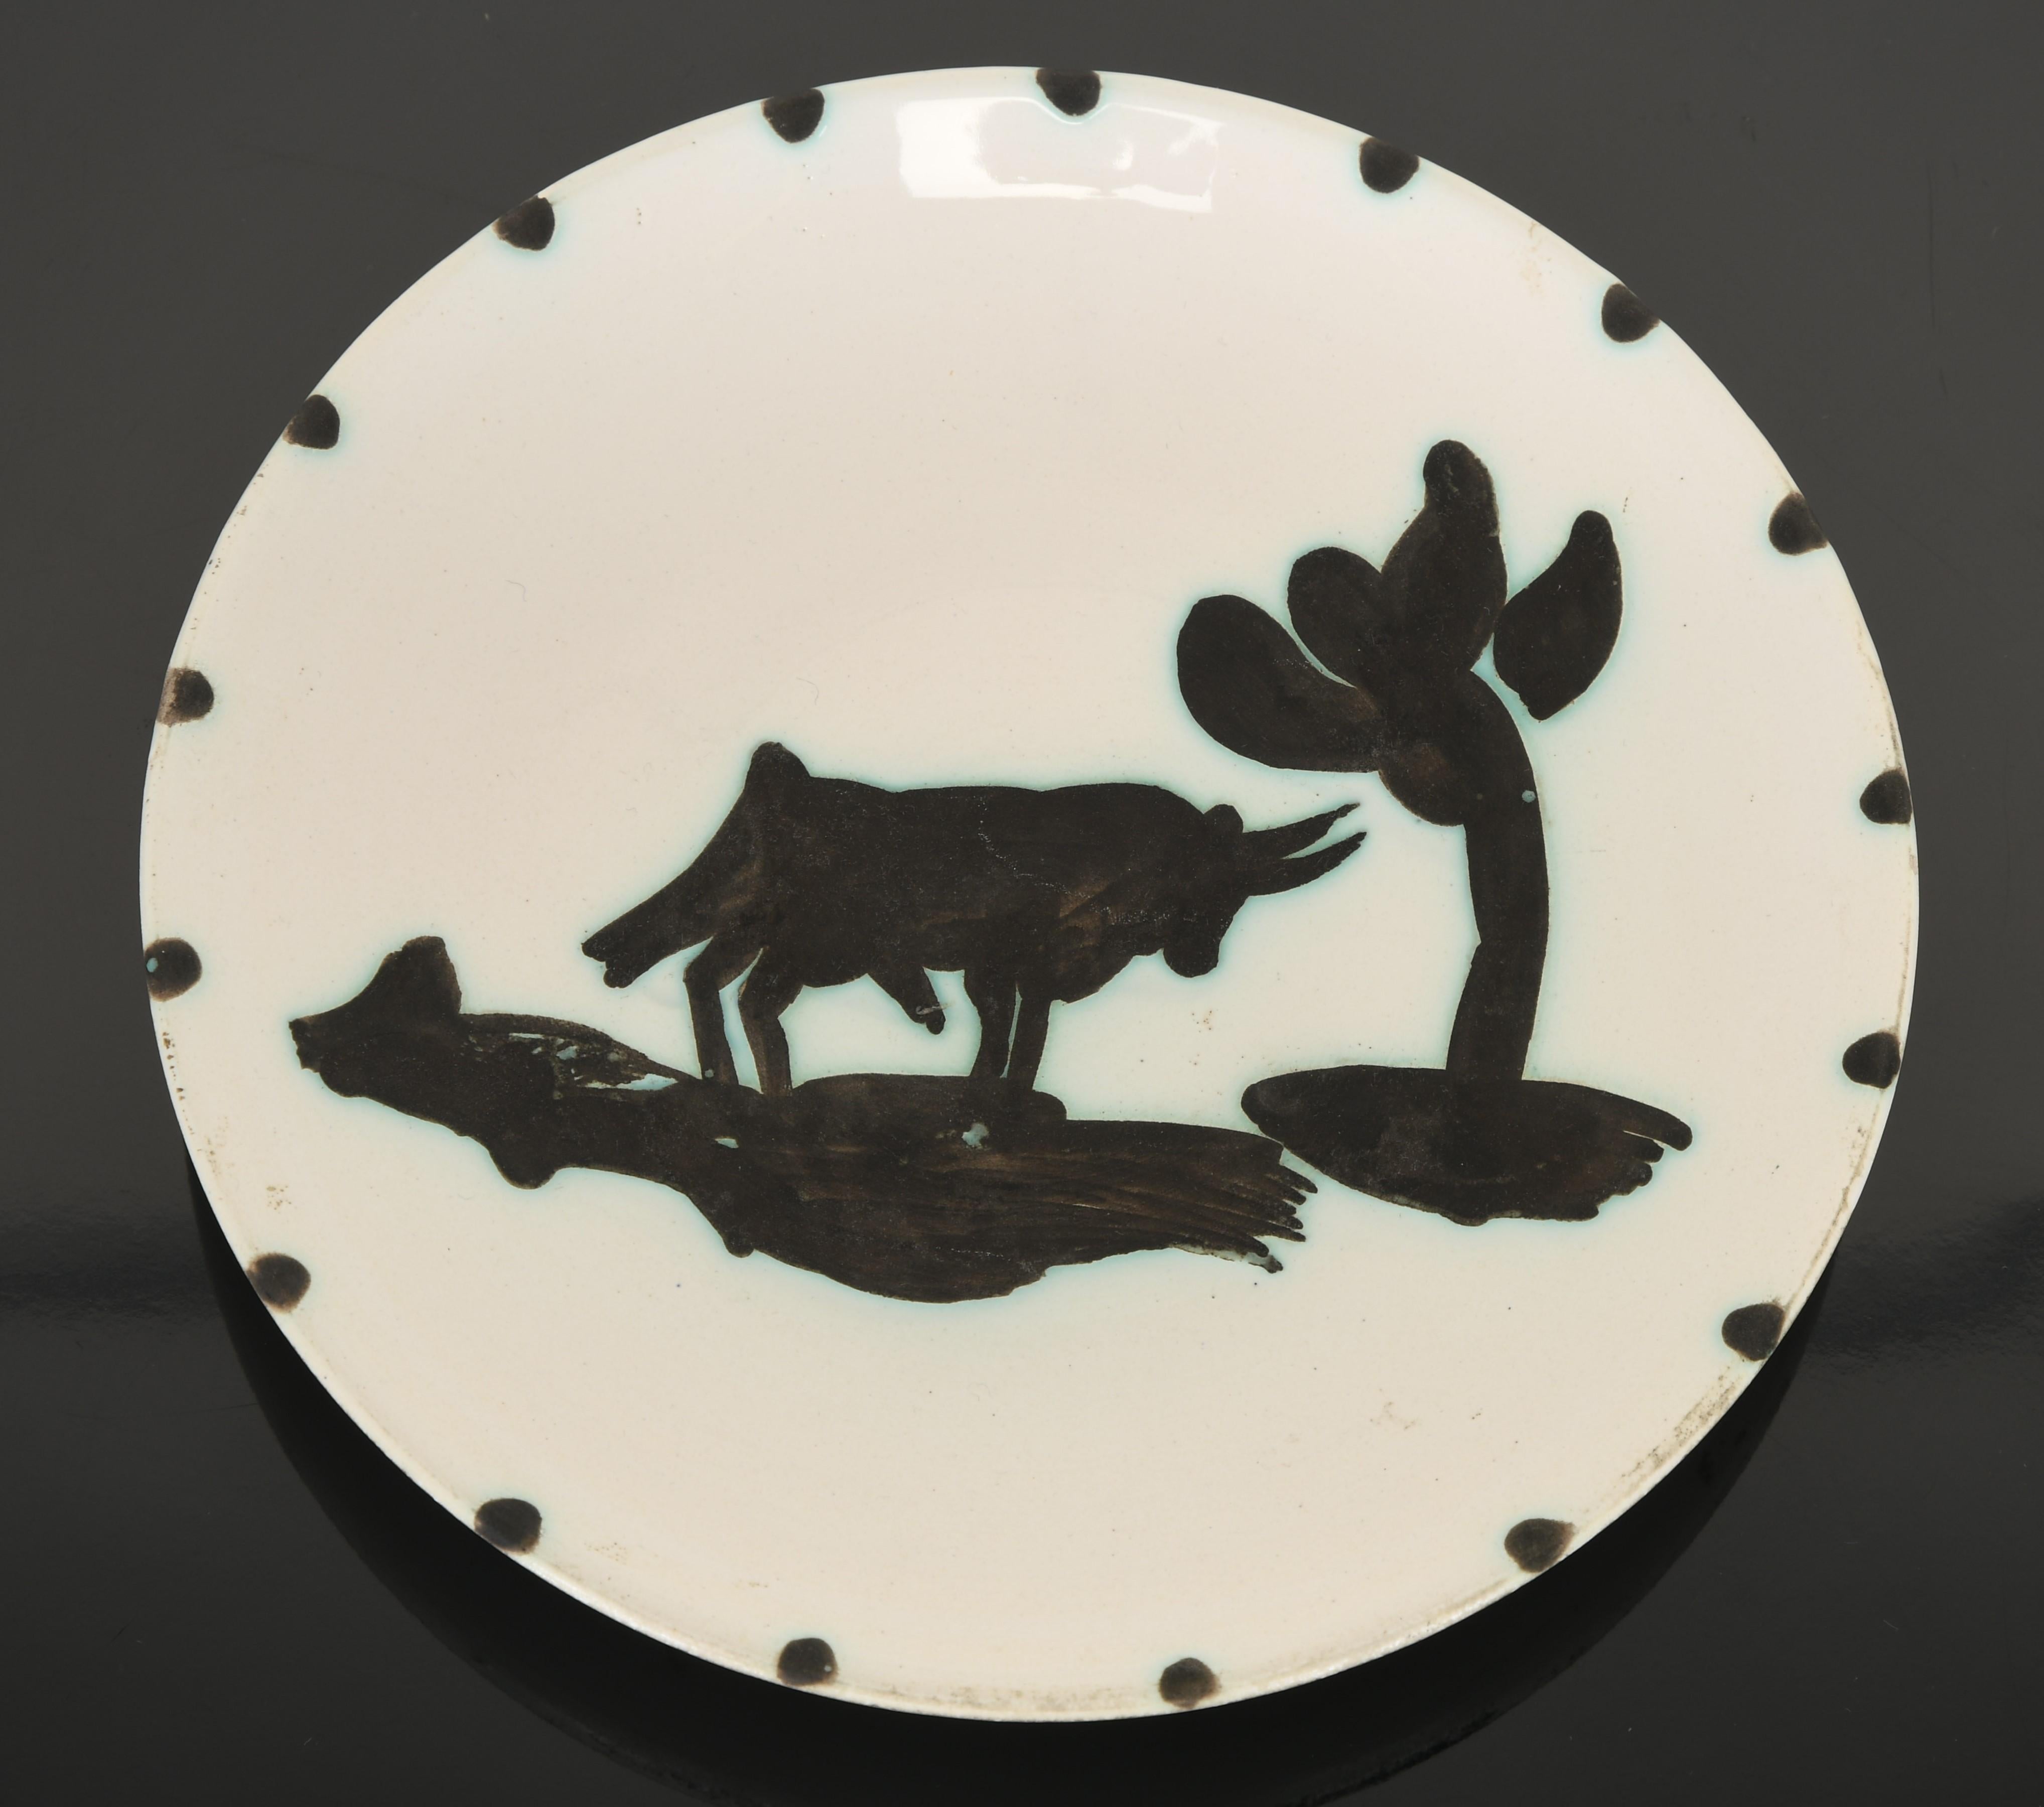 A limited-edition Pablo Picasso ceramic plate entitled 